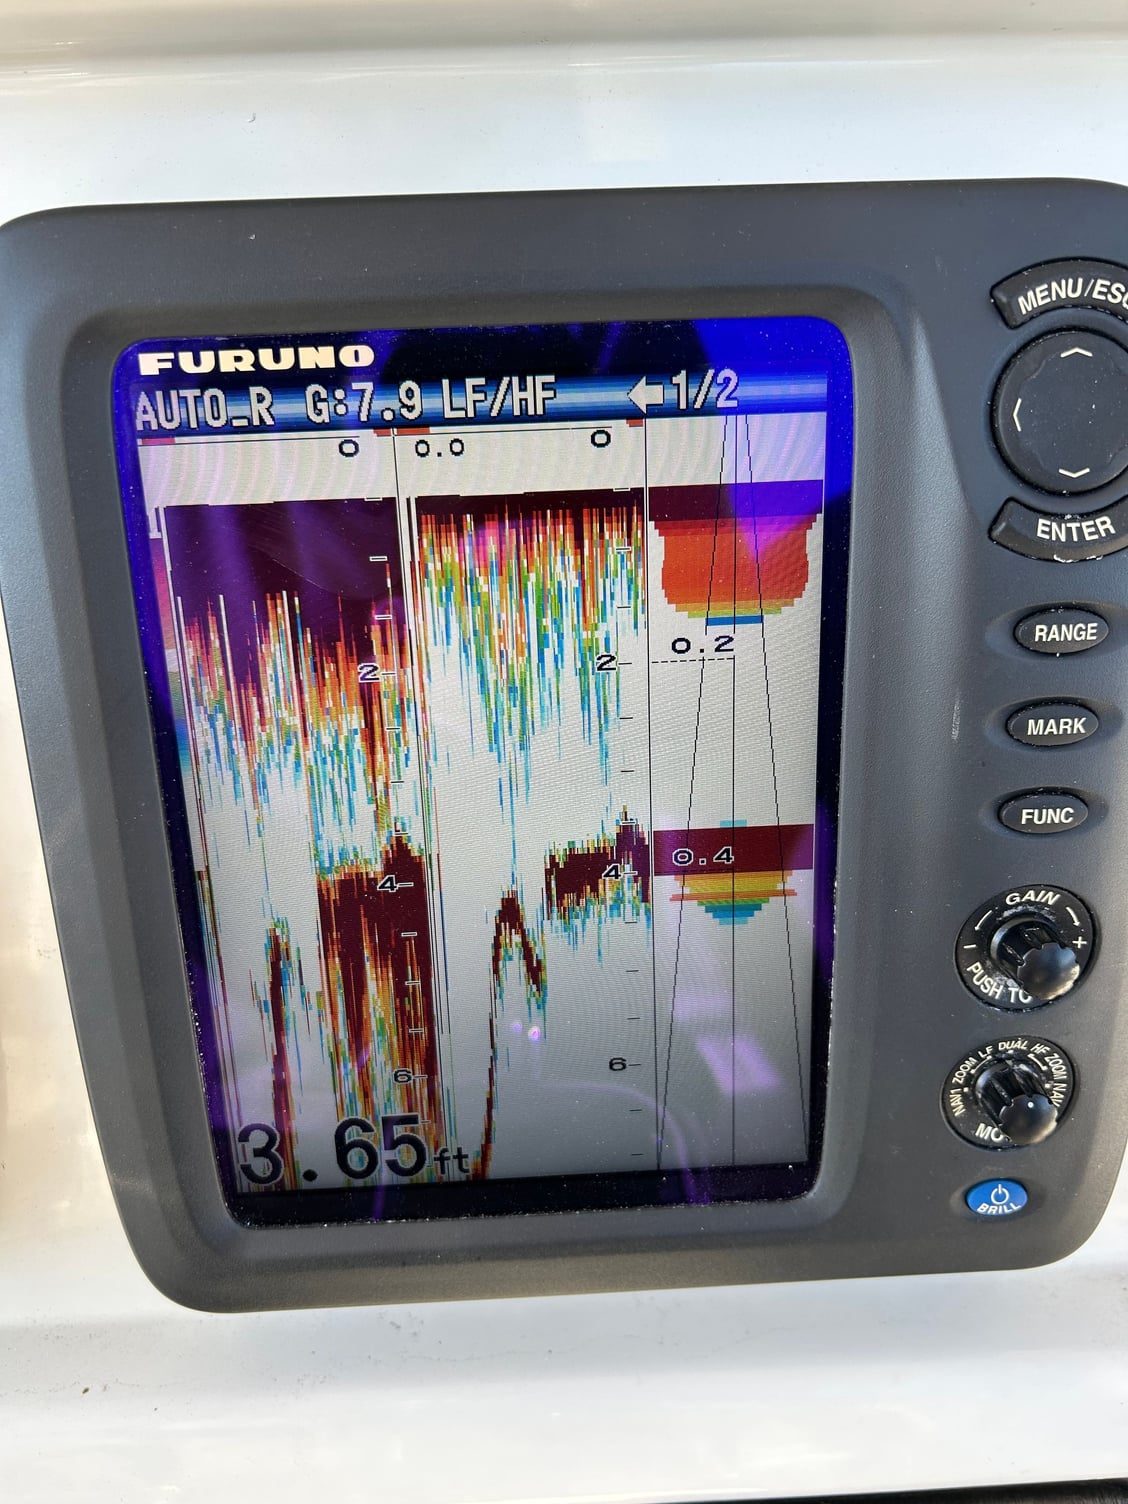 Garmin 1243xsv 12 GPS/Fish Finder, New, Never Used - The Hull Truth -  Boating and Fishing Forum